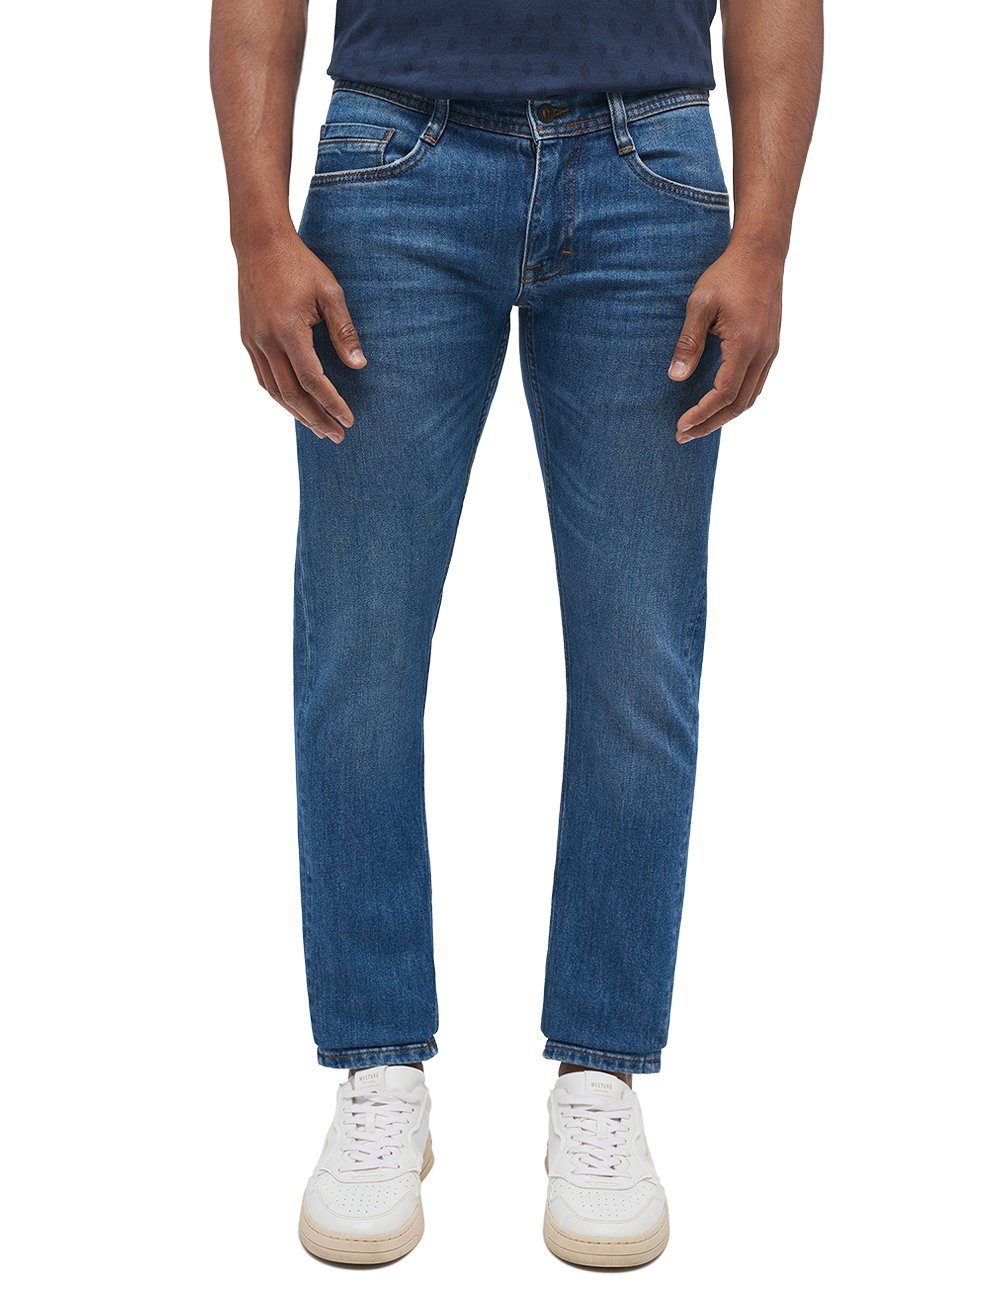 Mustang Slim fit jeans Style Oregon Tapered